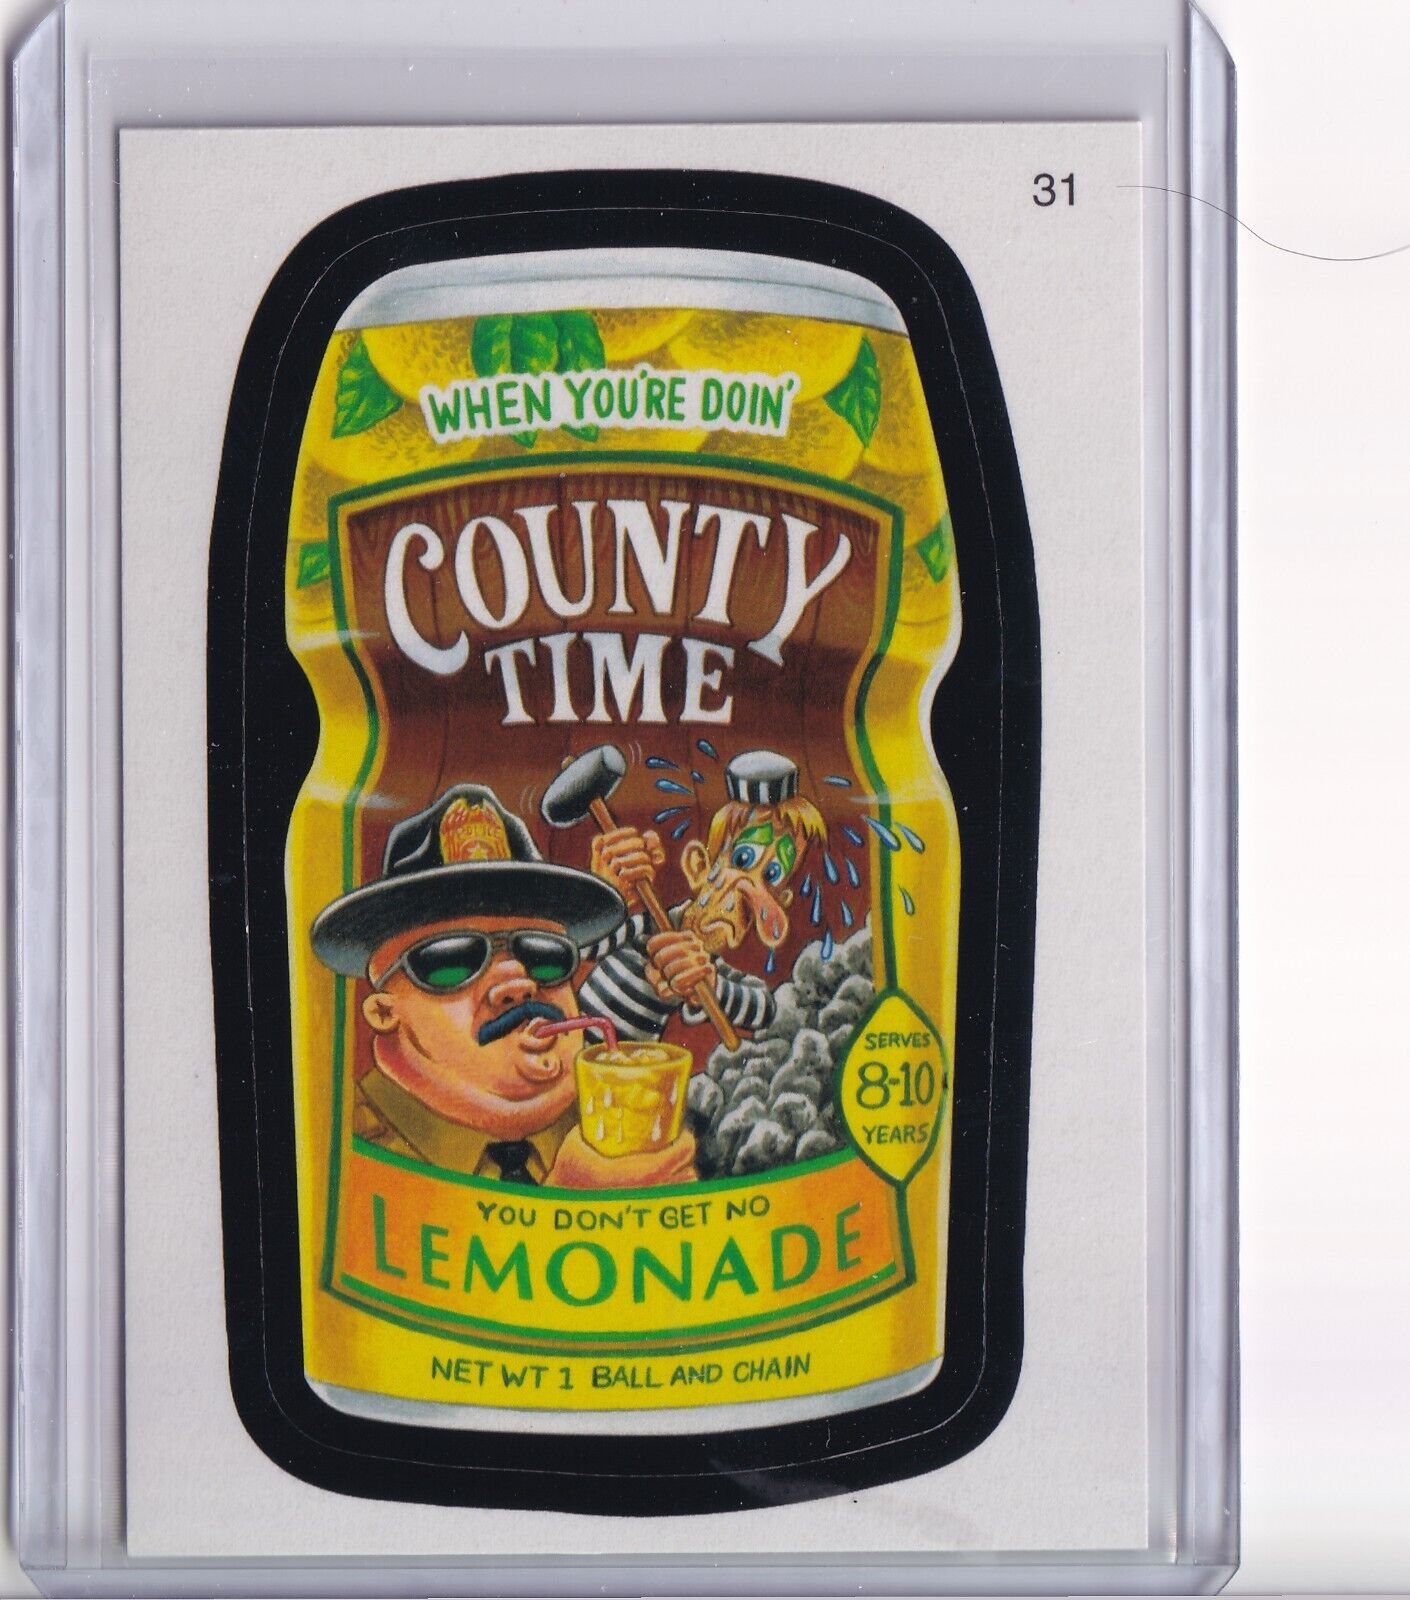 2010 Topps Wacky Packages Series 7 County Time Lemonade #31